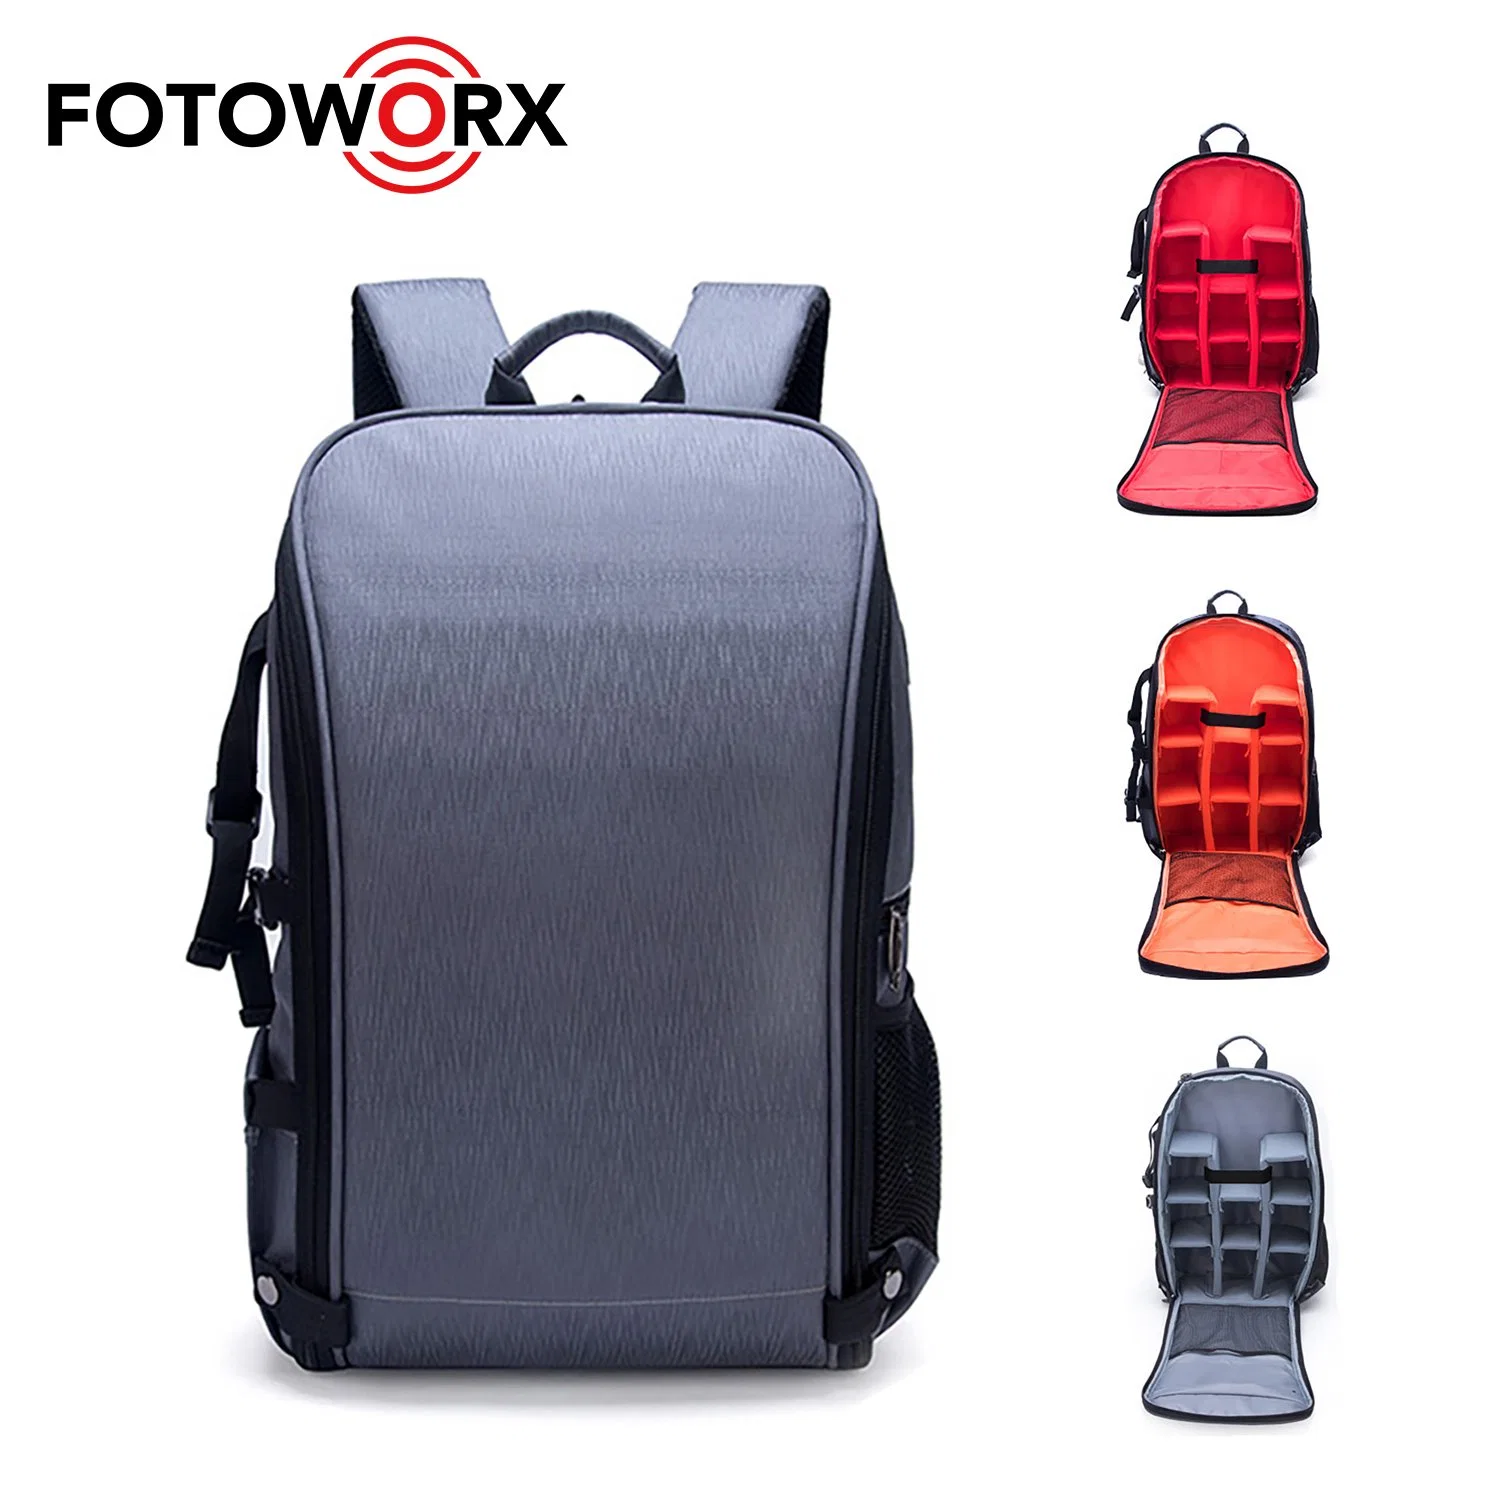 Camera Bags Backpack for DSLR/SLR Camera Lens Tripods Accessories